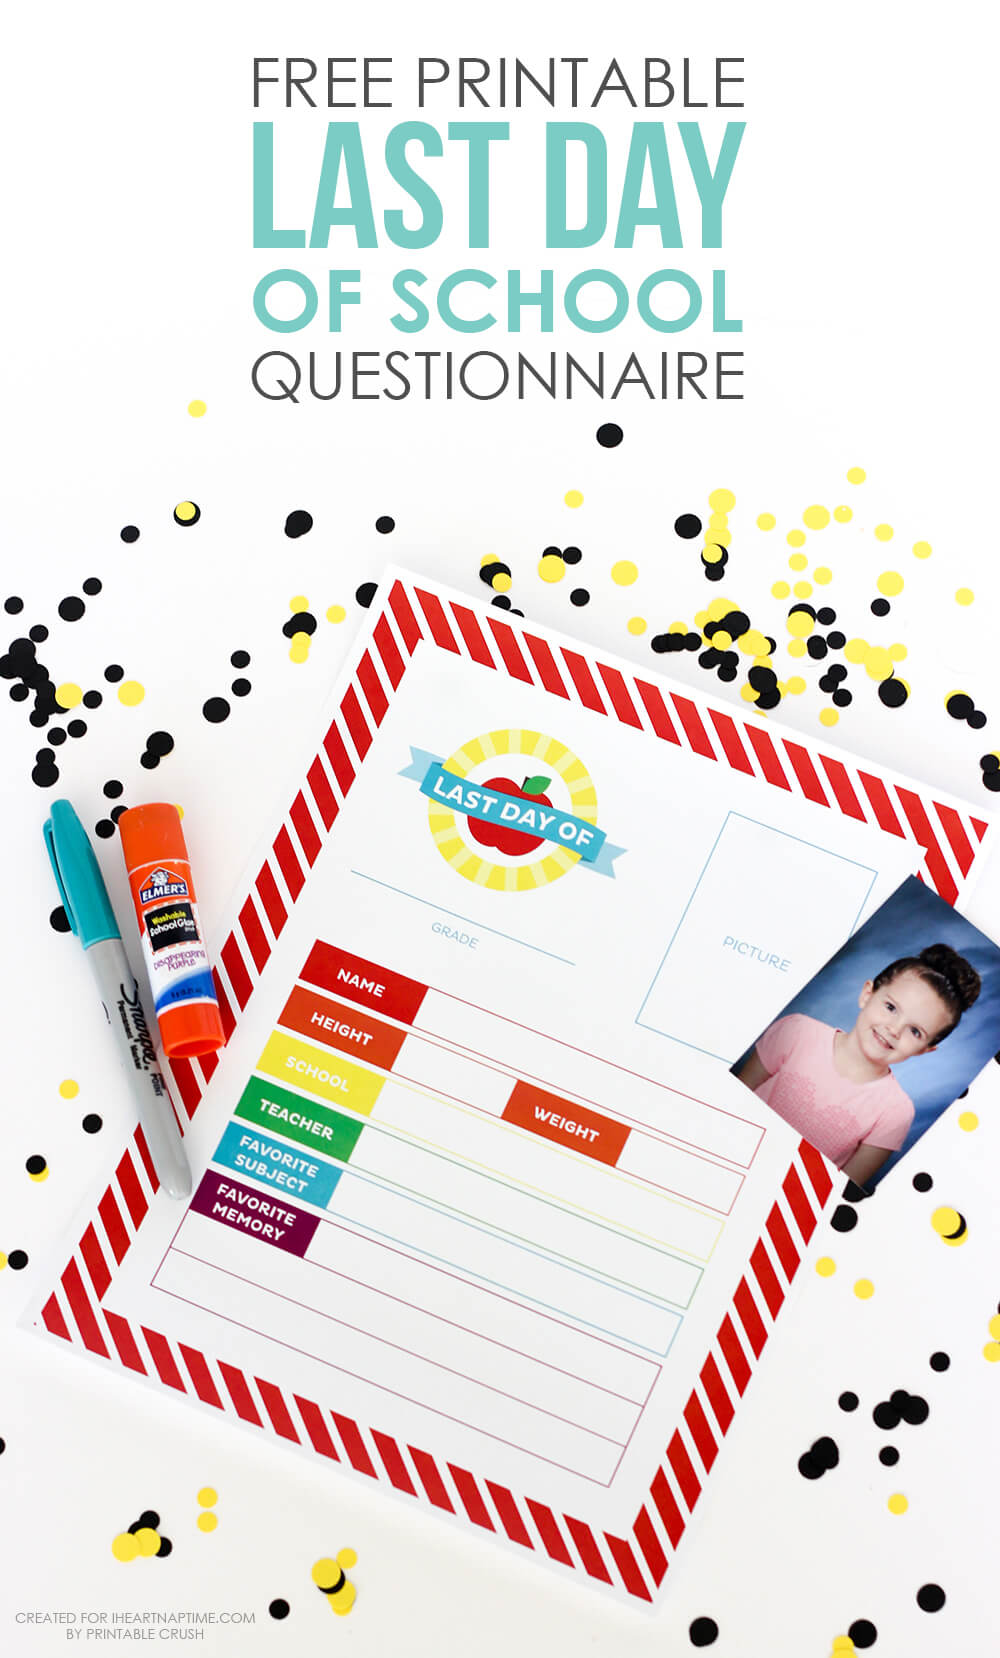 Last Day of School Questionnaire - this keepsake is a fun way to end the school year!